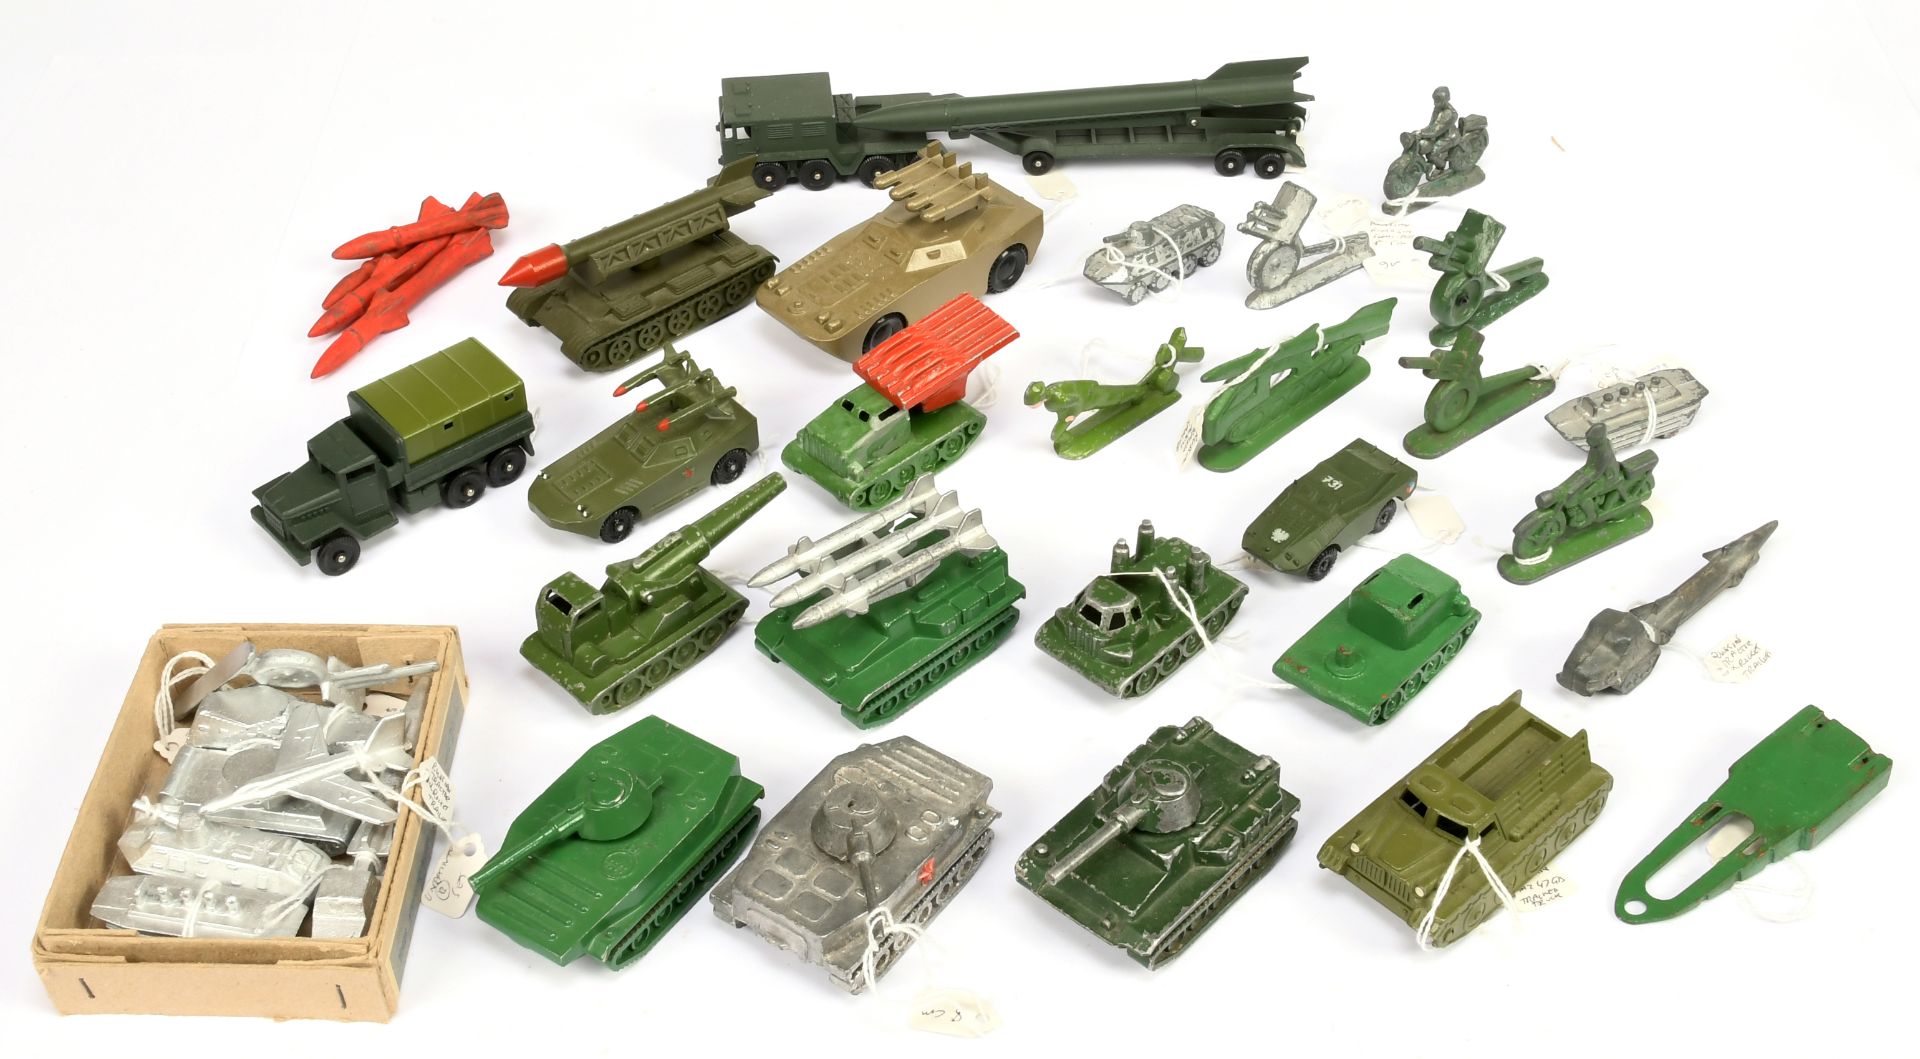 Russain made a large group of military smaller scale issues - to include tanks, rocket launchers